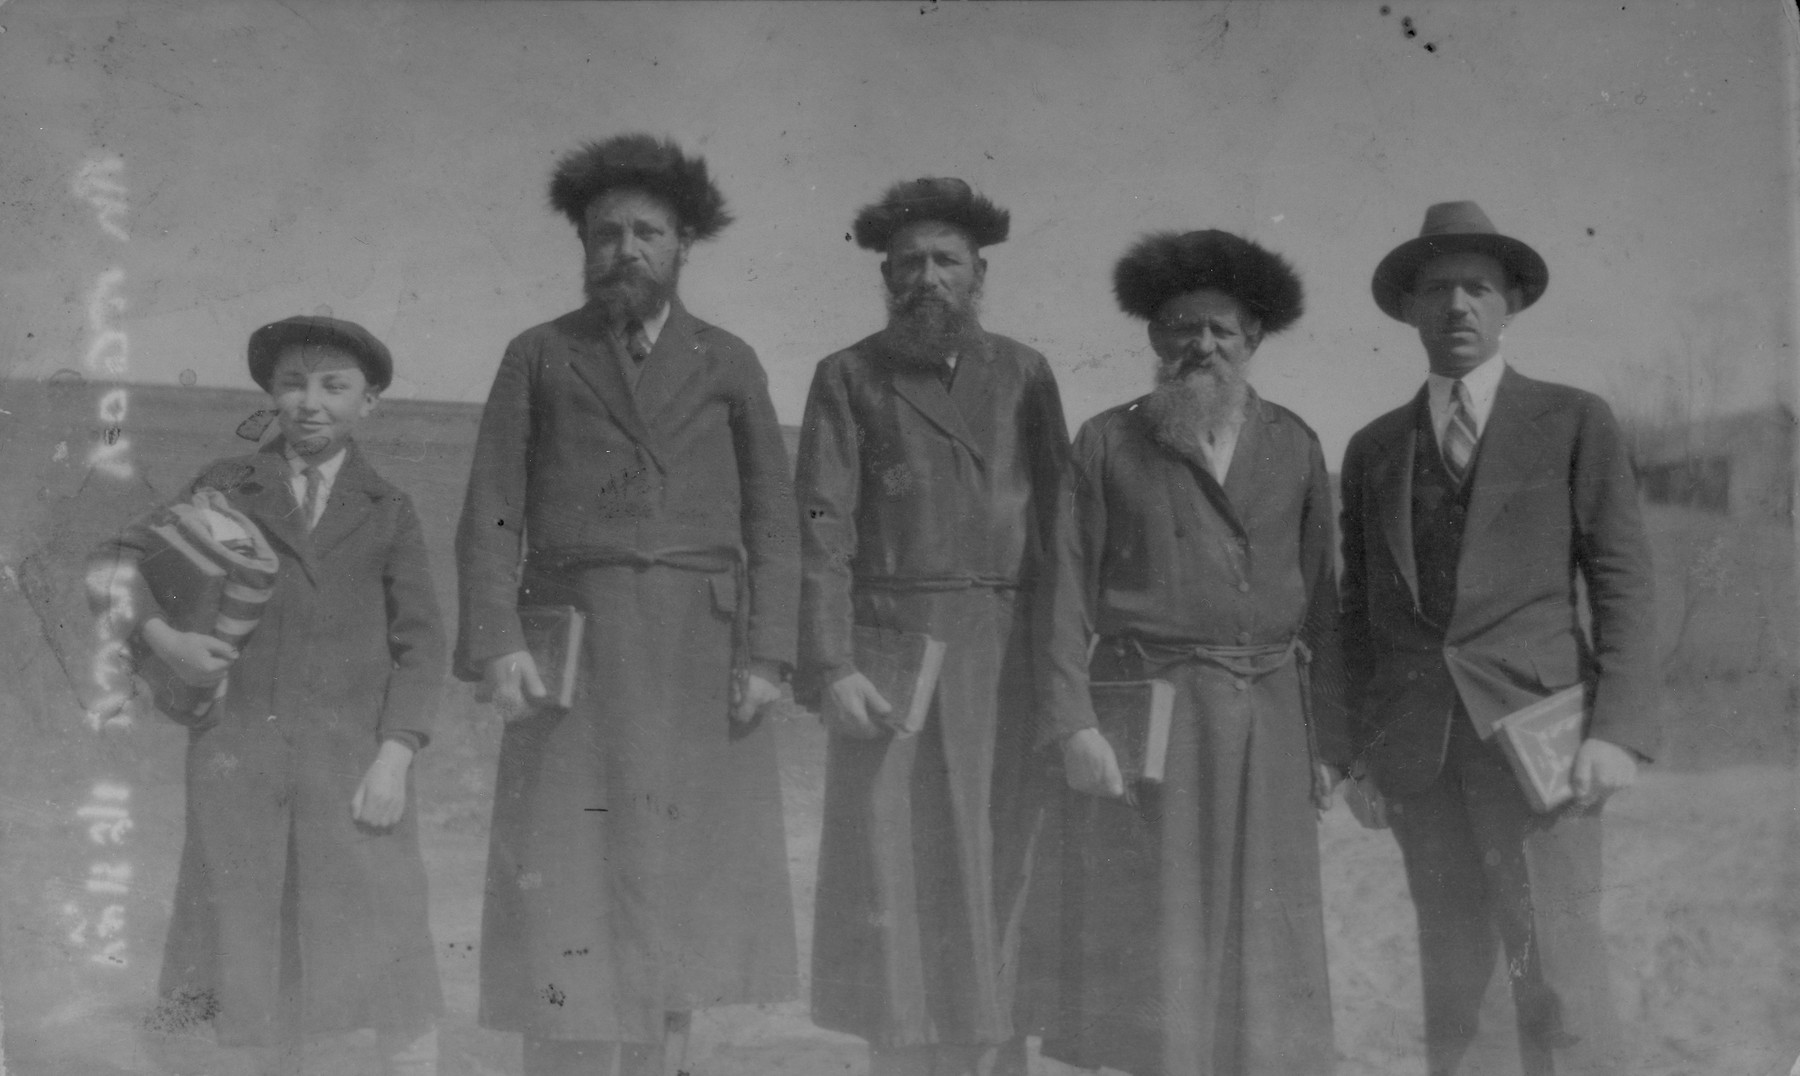 Group portrait of Hasidic Jews standing outside holding books in Raczyna, Poland.  

Pictured from left to right are: Chaim Yankel Gurfein, Lejzer Gurfein, Moshe Yosl Dudlsack, Itzhak Dudlsack, and an unidentified American visitor.